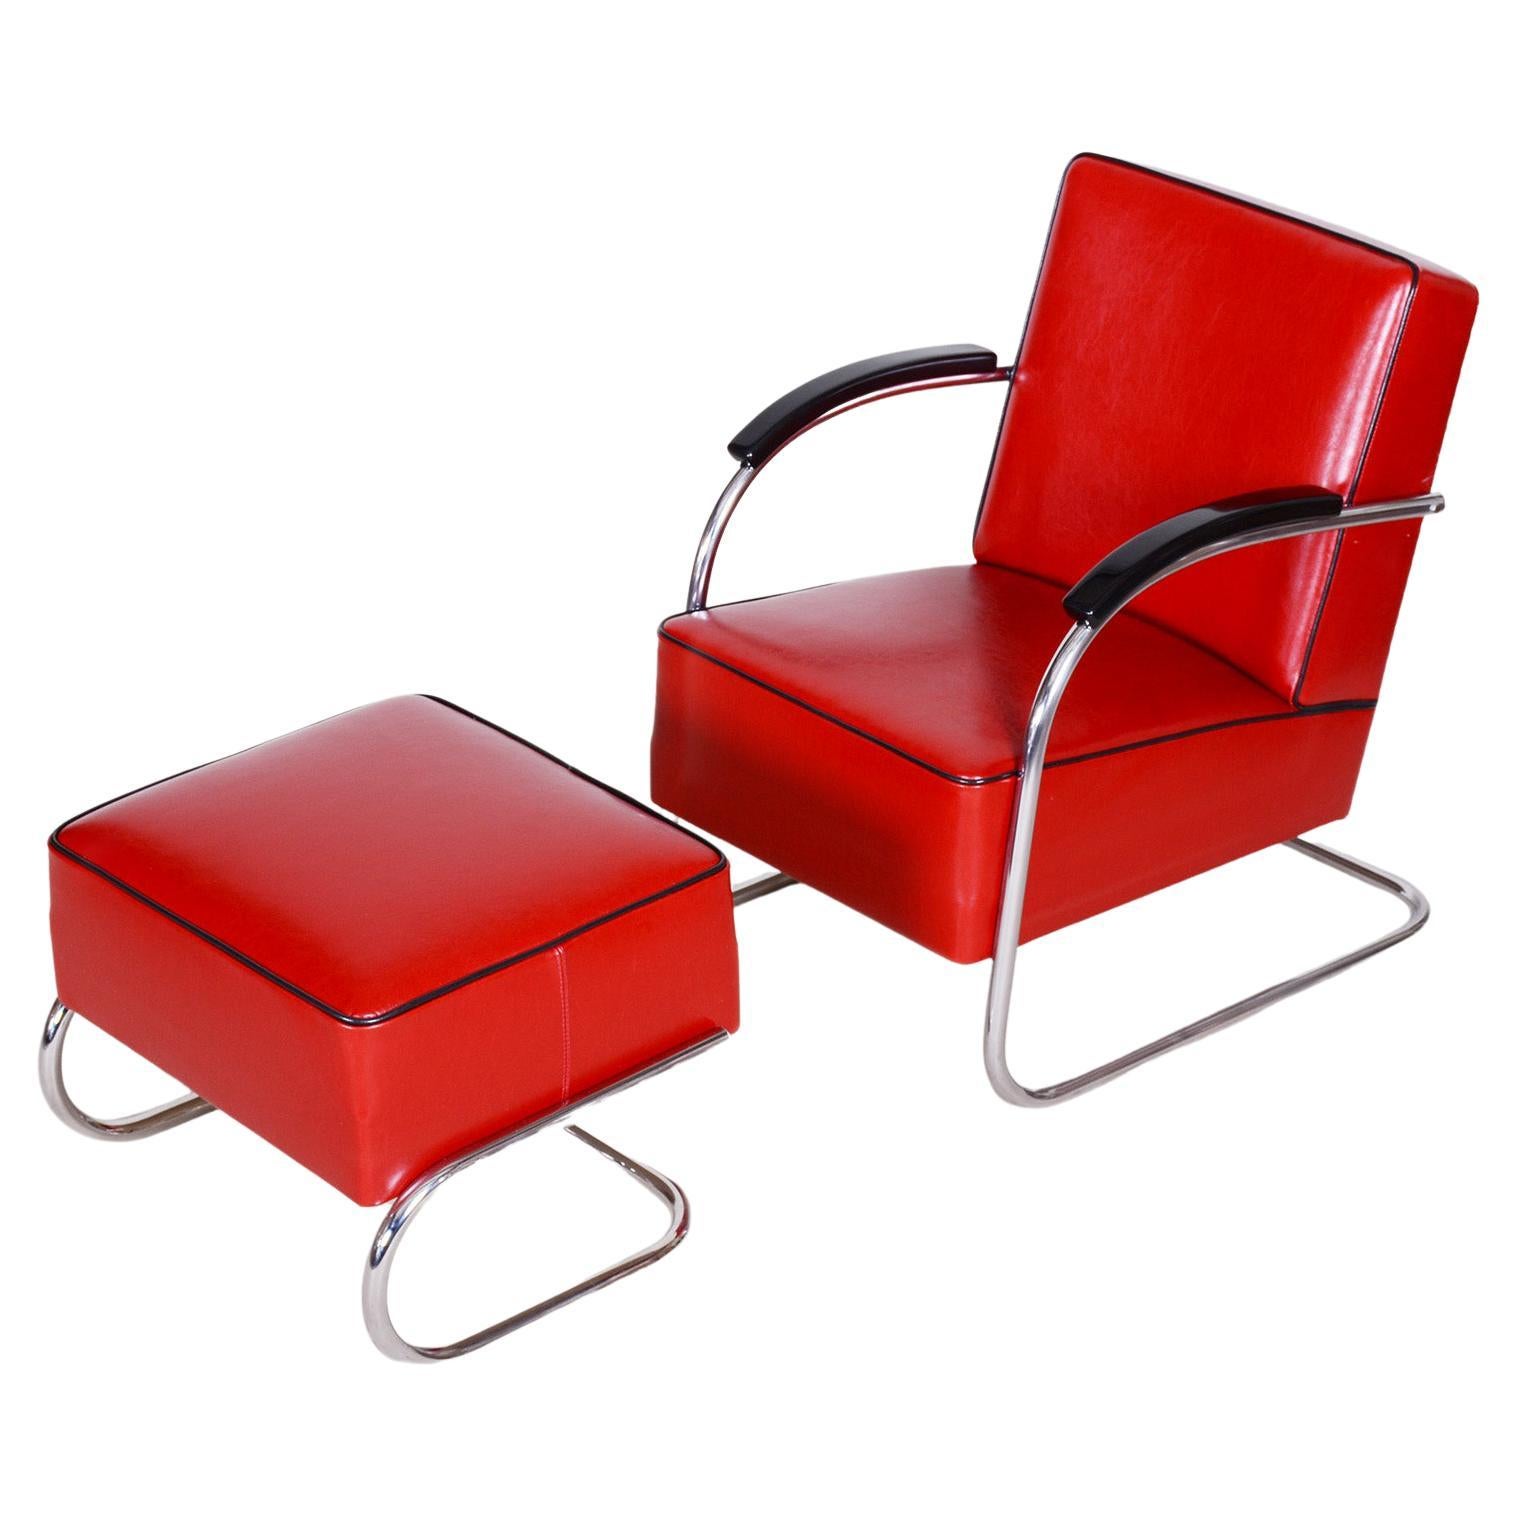 Red Mucke Melder Armchair and Ottoman, 1930s Czechia For Sale